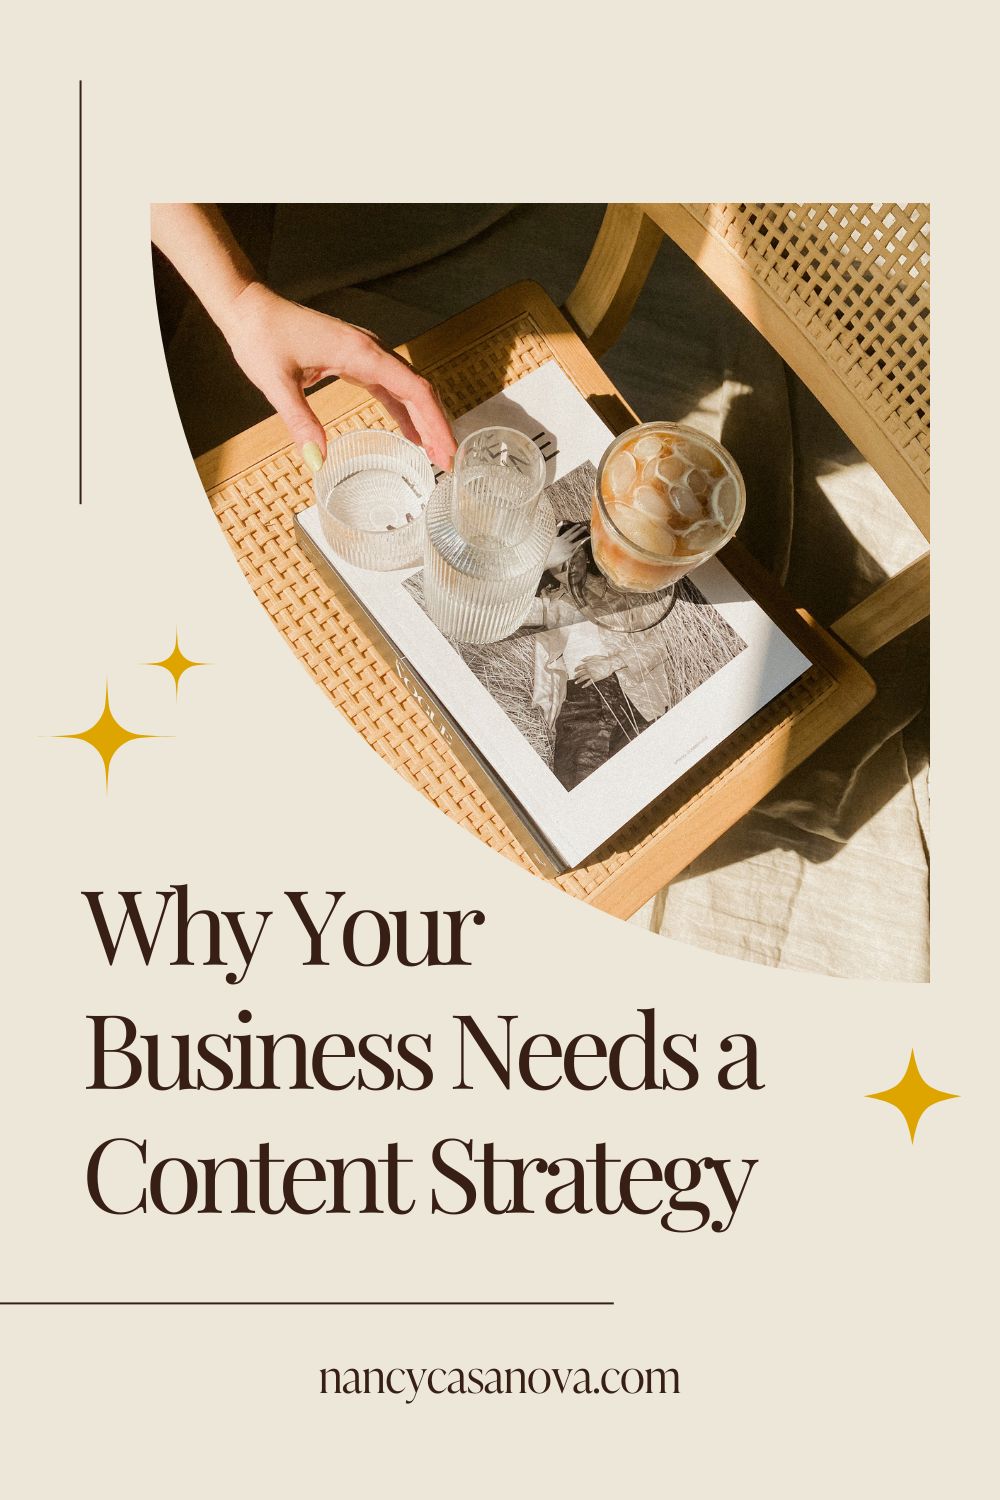 Implementing a content strategy can help your business increase brand awareness by providing value to your target audience, maintaining consistency in your brand's messaging, optimizing for search engines, amplifying through social media and with collaborating with influencers, content creators or brands. 